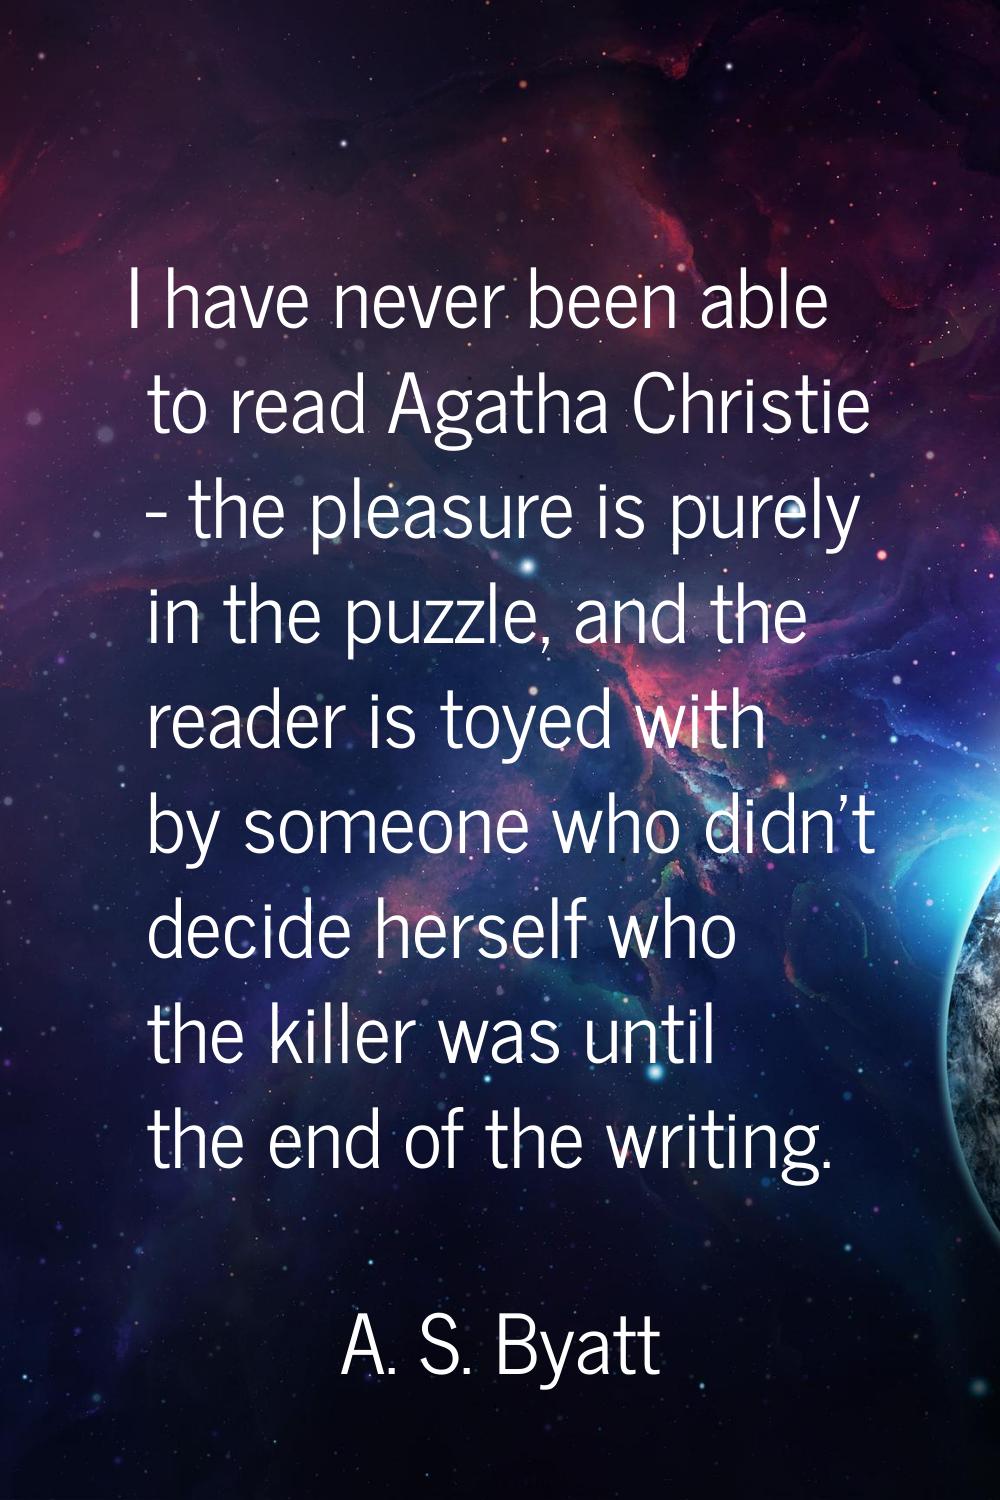 I have never been able to read Agatha Christie - the pleasure is purely in the puzzle, and the read